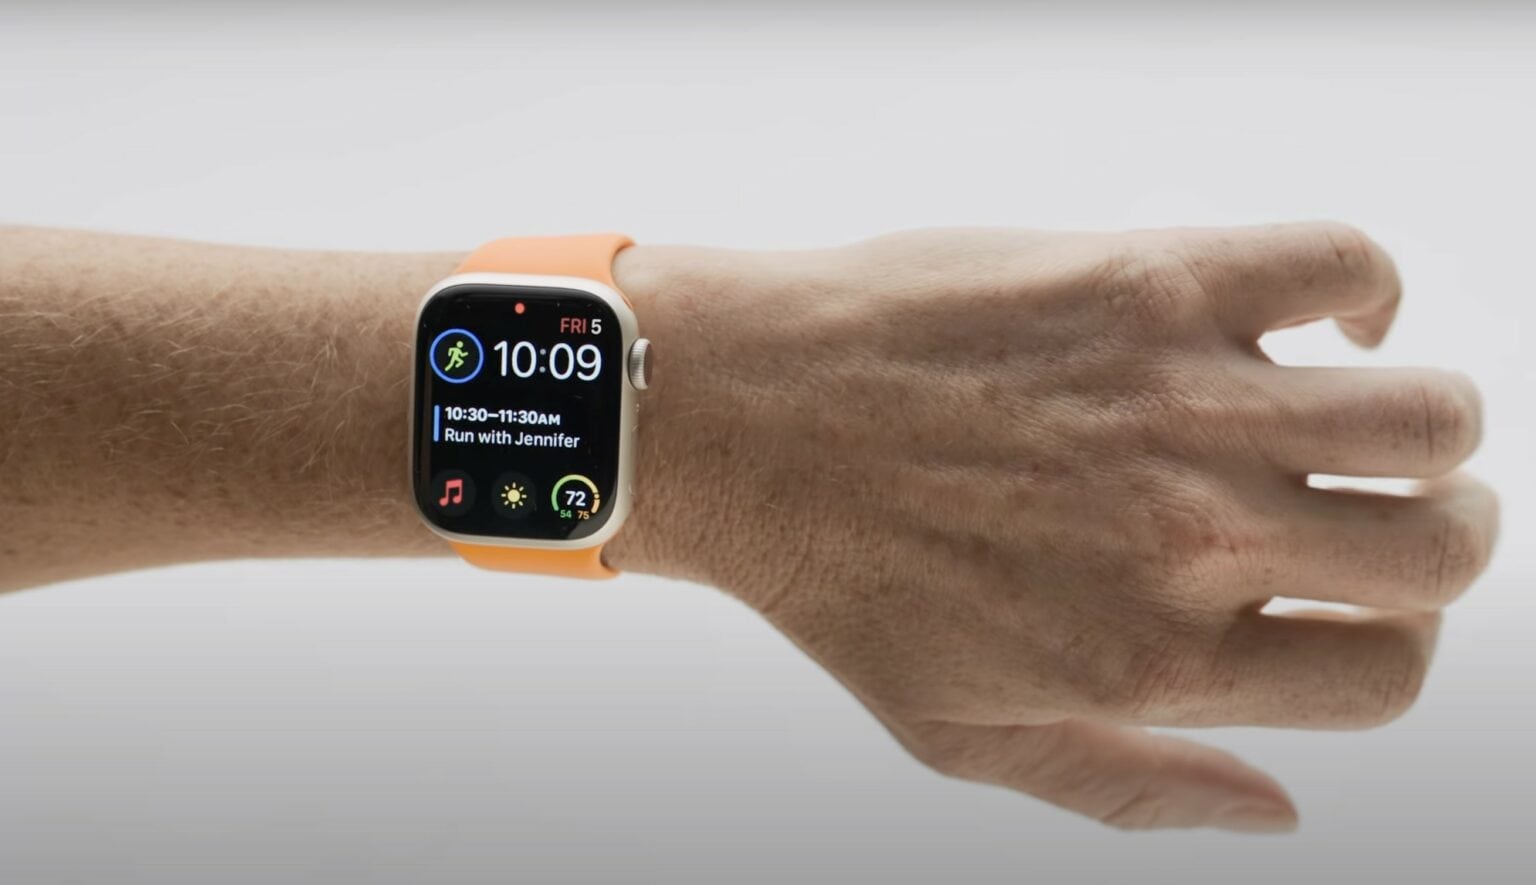 Apple Watch AssistiveTouch gesture controls